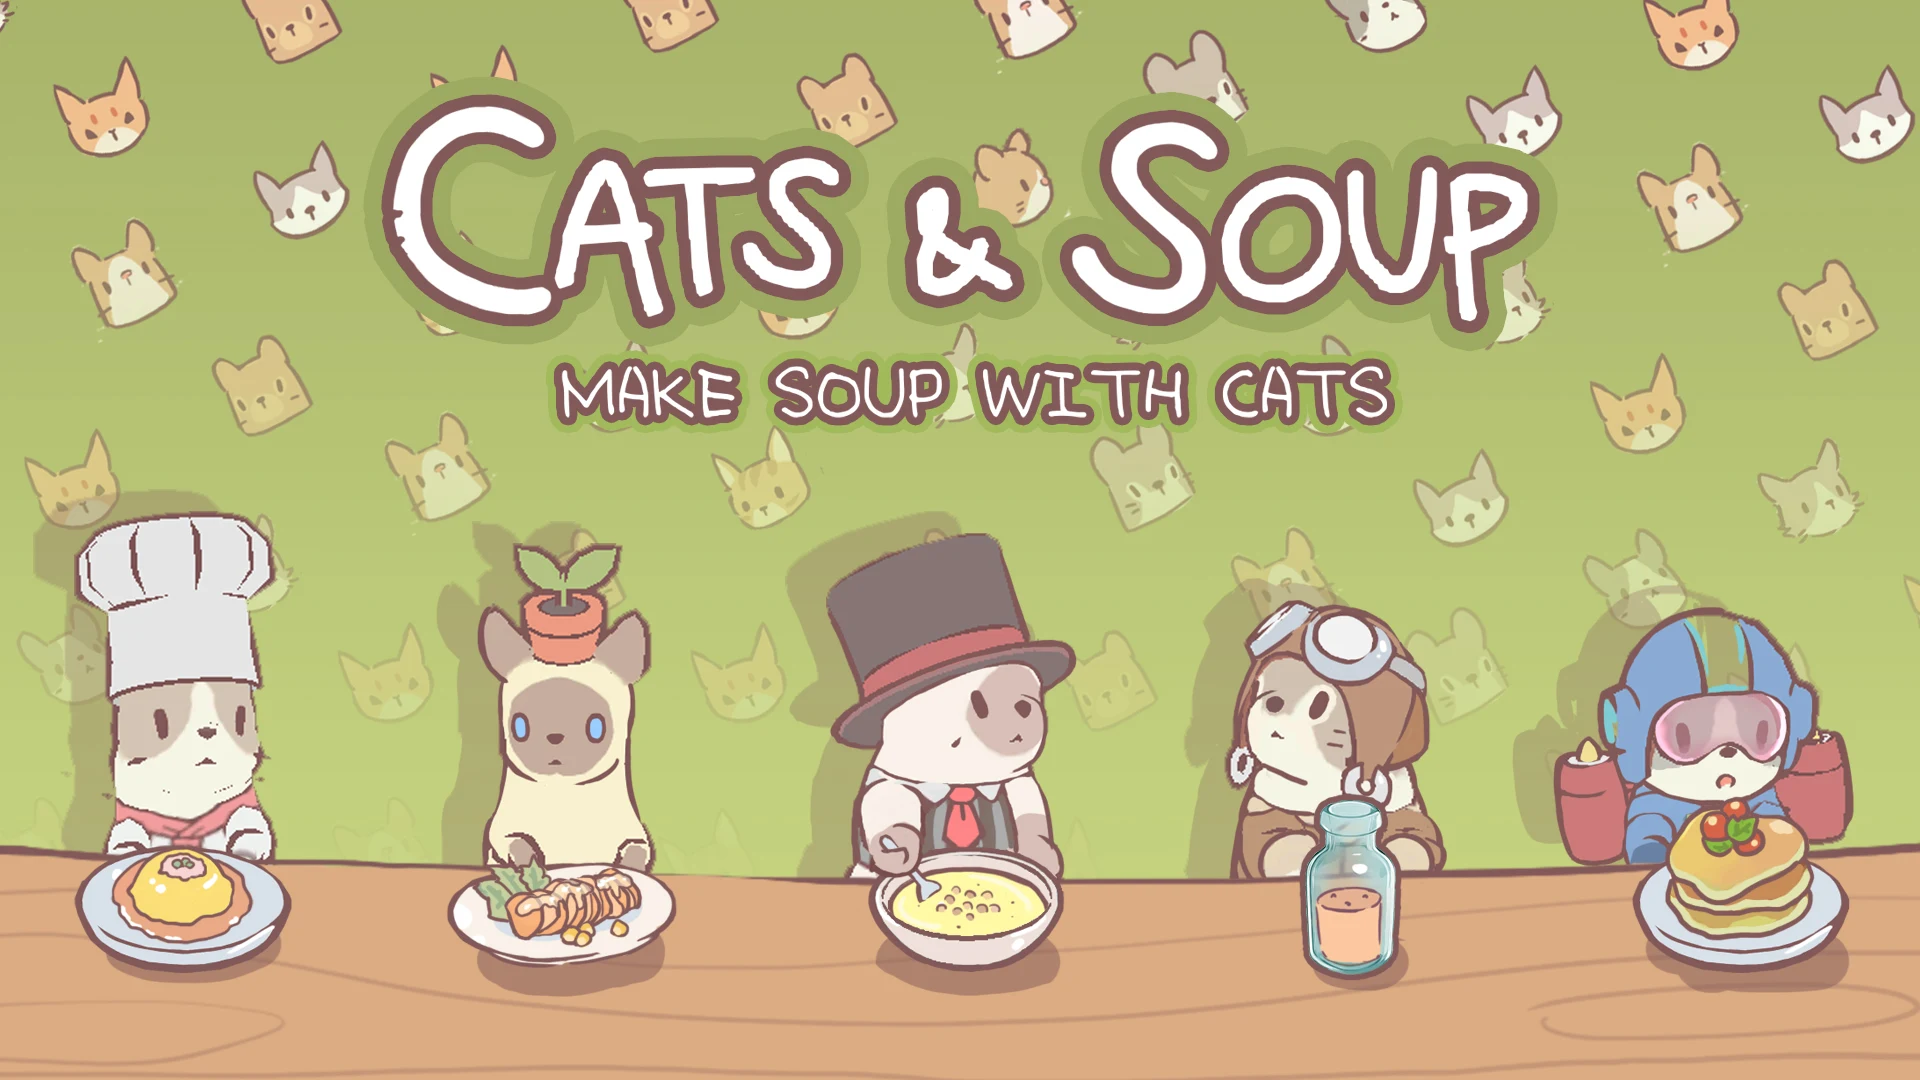 Cats & Soup - Cute Idle Game